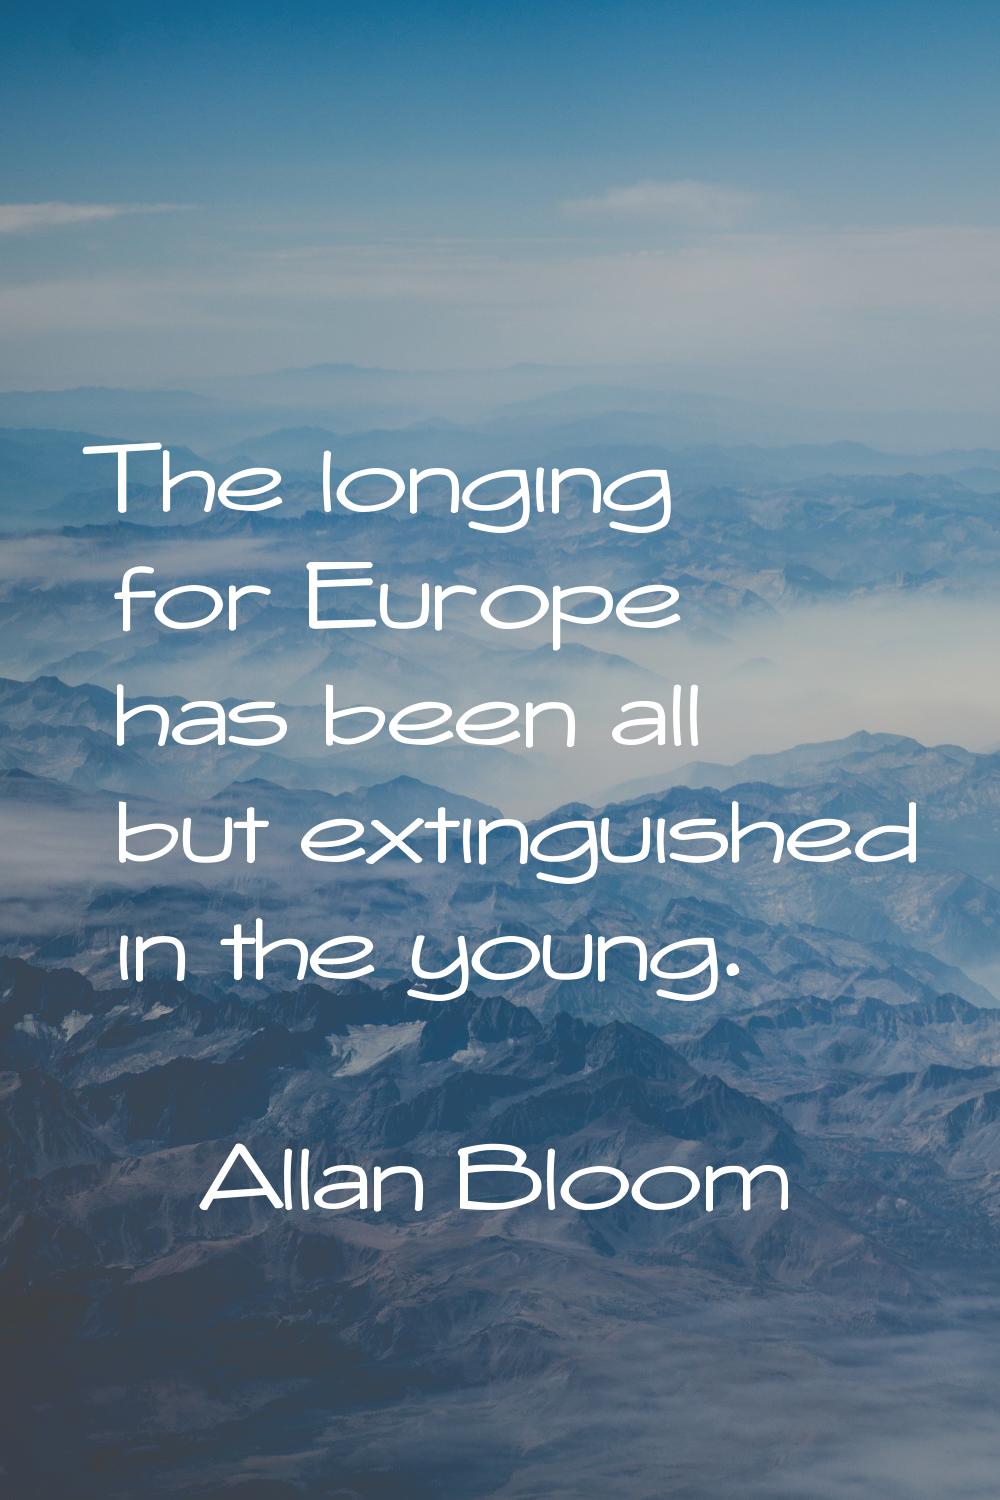 The longing for Europe has been all but extinguished in the young.